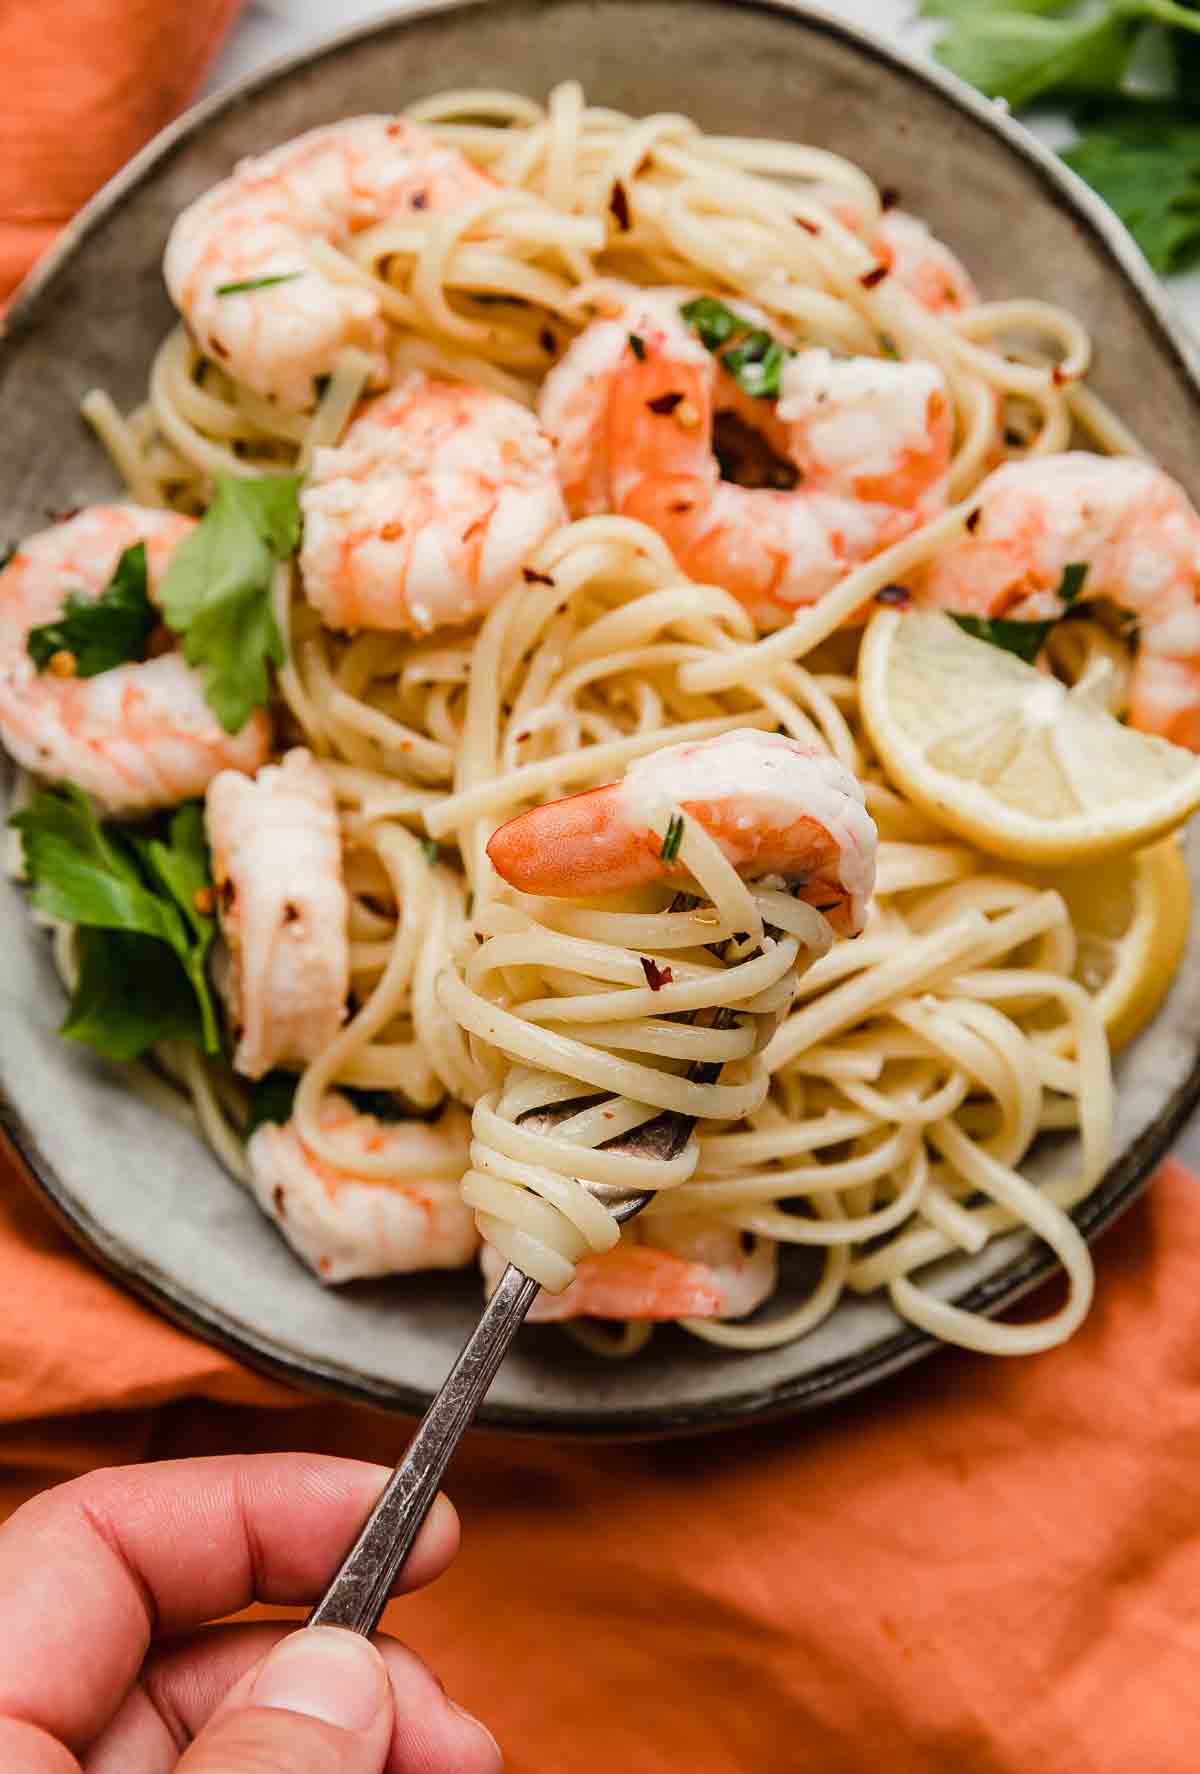 A fork twisting linguine noodles with shrimp attached to the end of the fork.